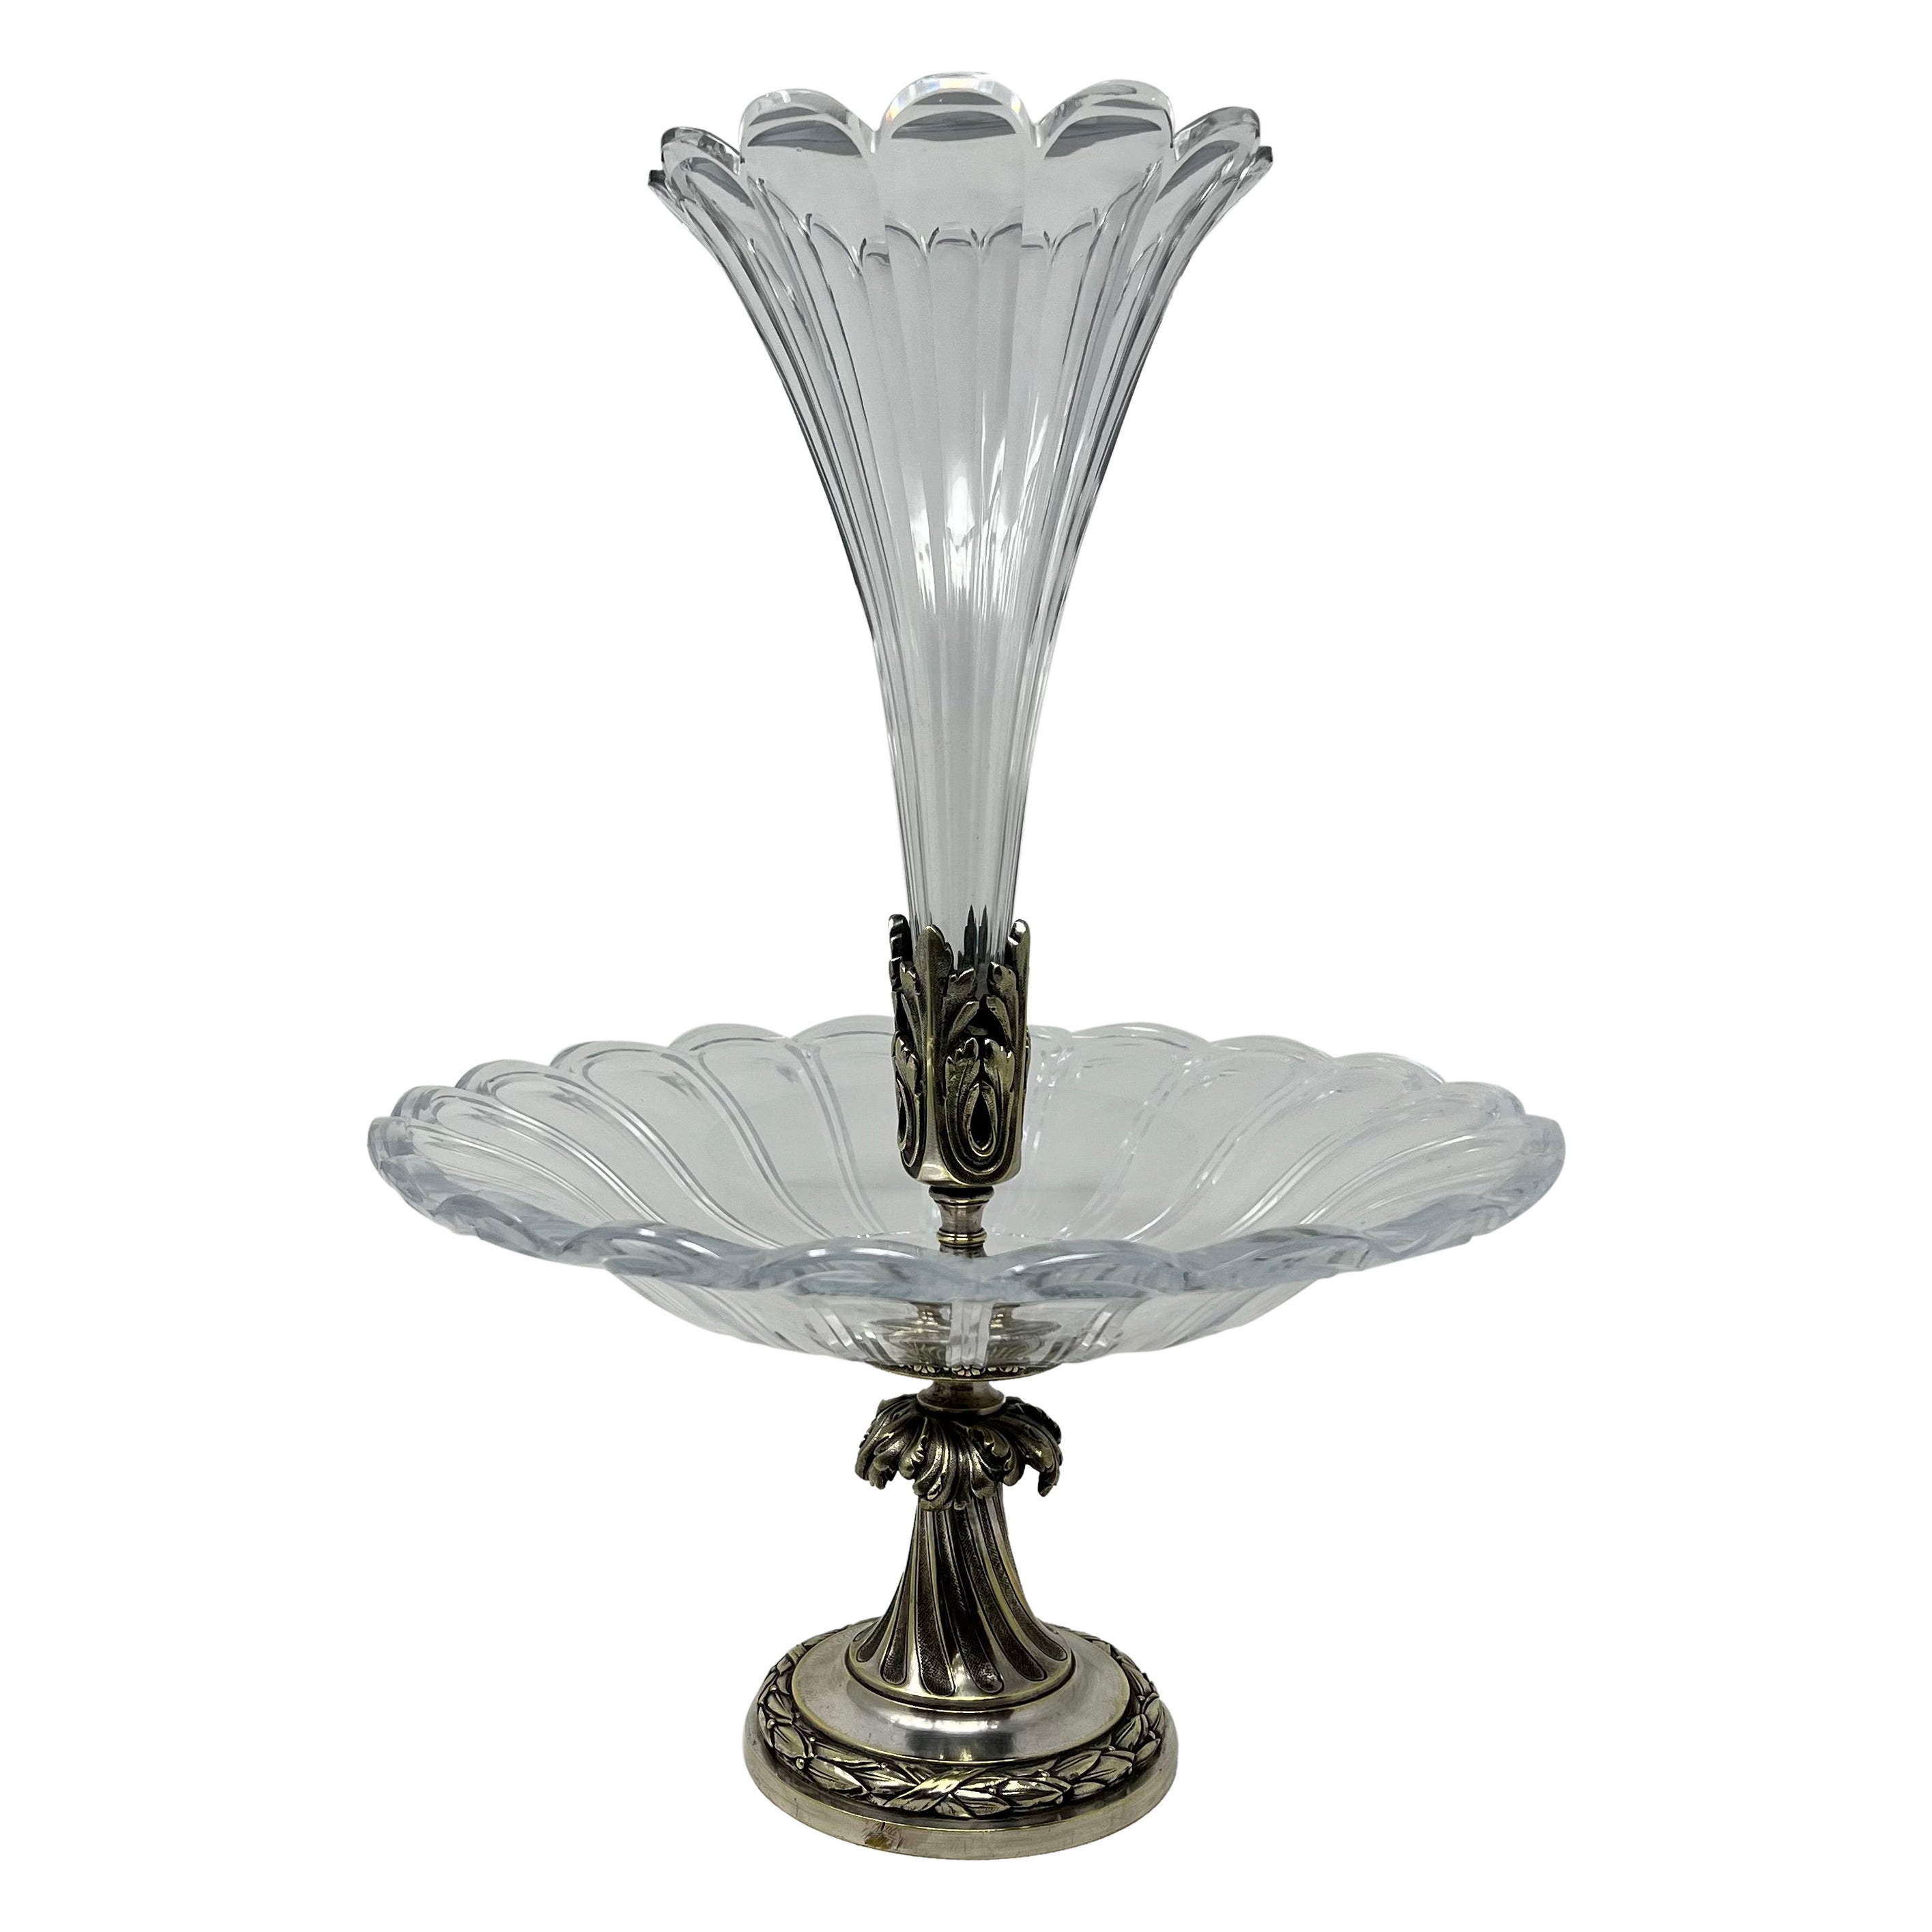 Antique French Silver on Bronze Baccarat Epergne circa 1865-75 For Sale